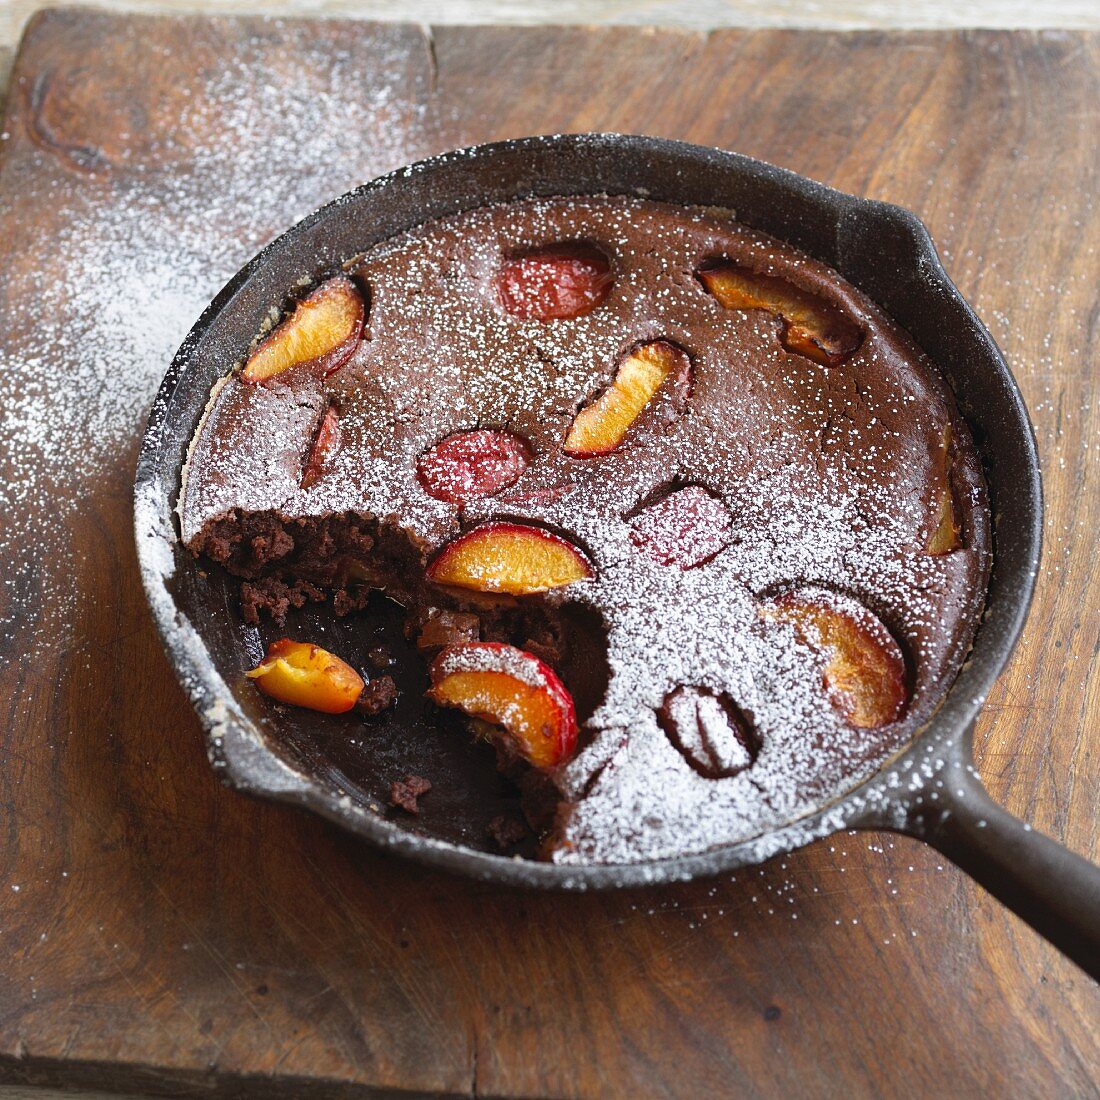 Chocolate and peach clafoutis dusted with icing sugar